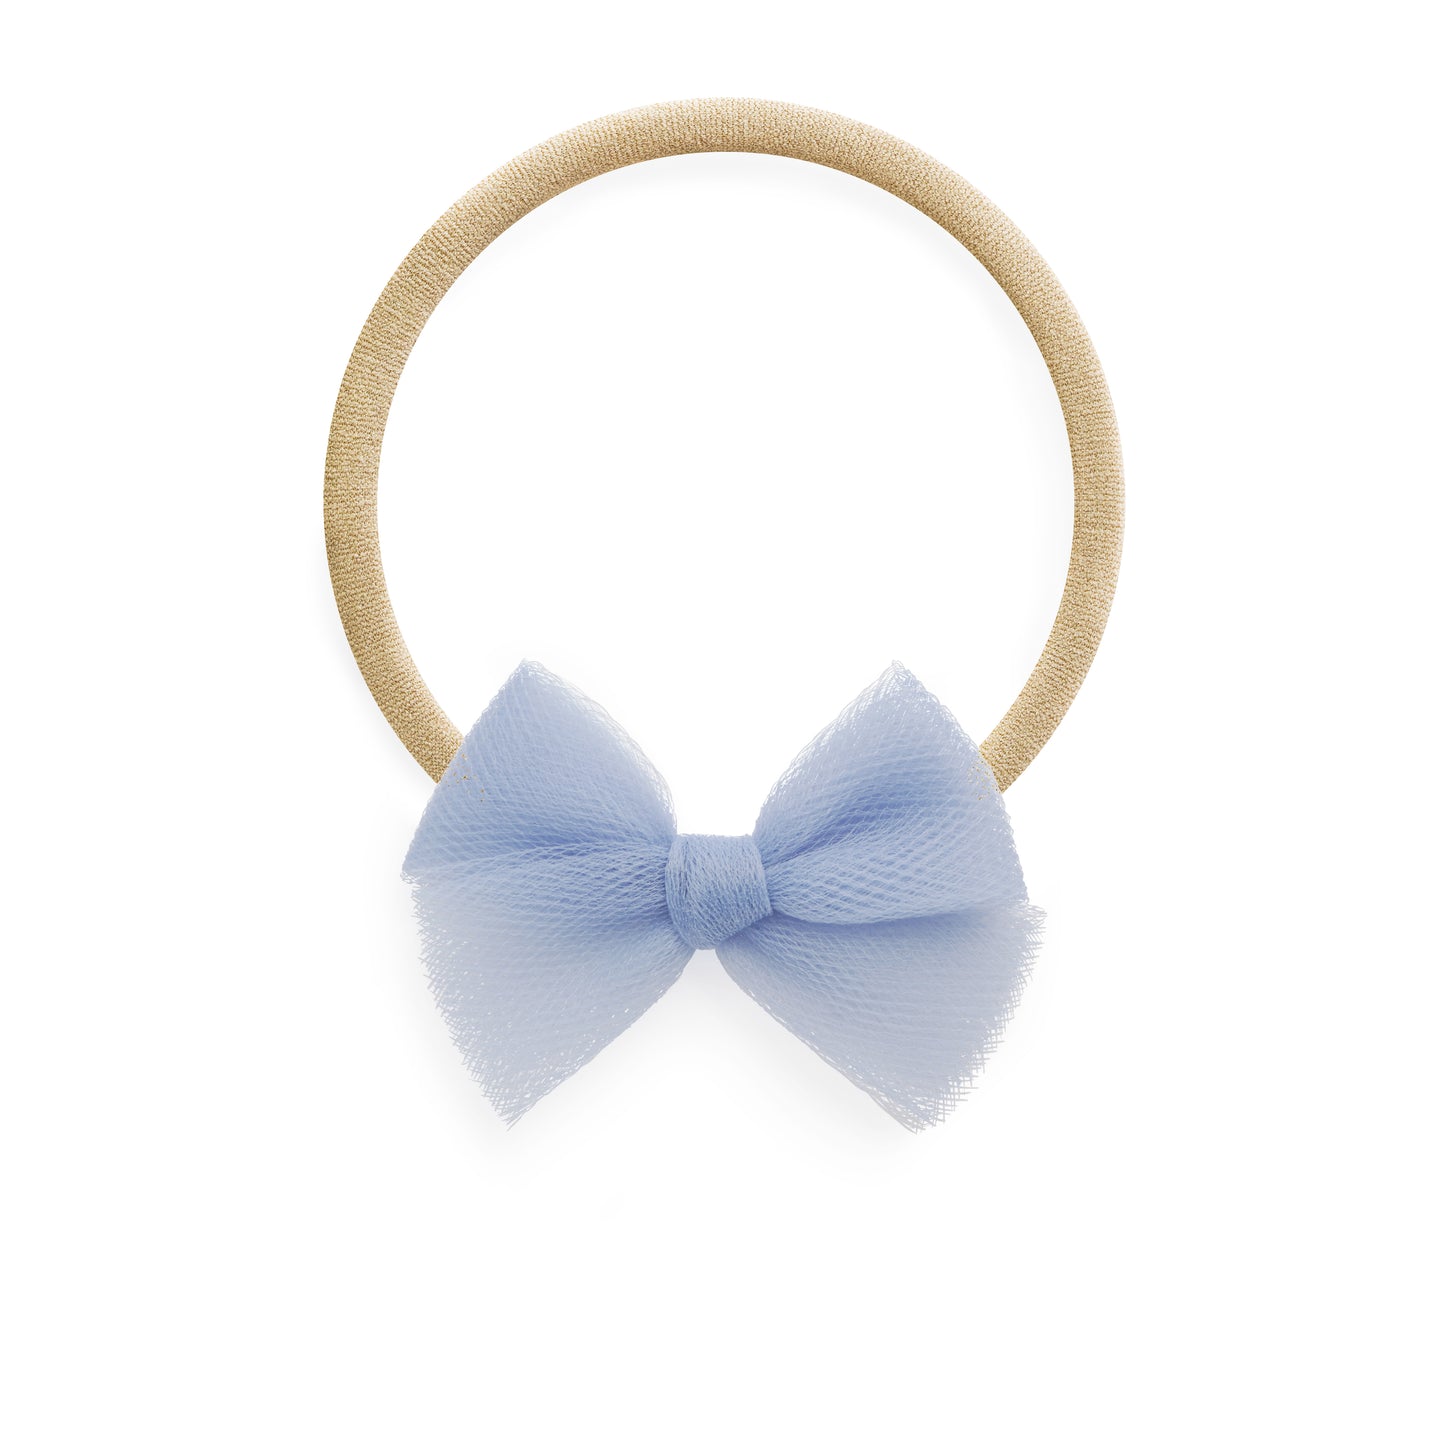 Ballet Bow for Babies and Big Girls: Stella